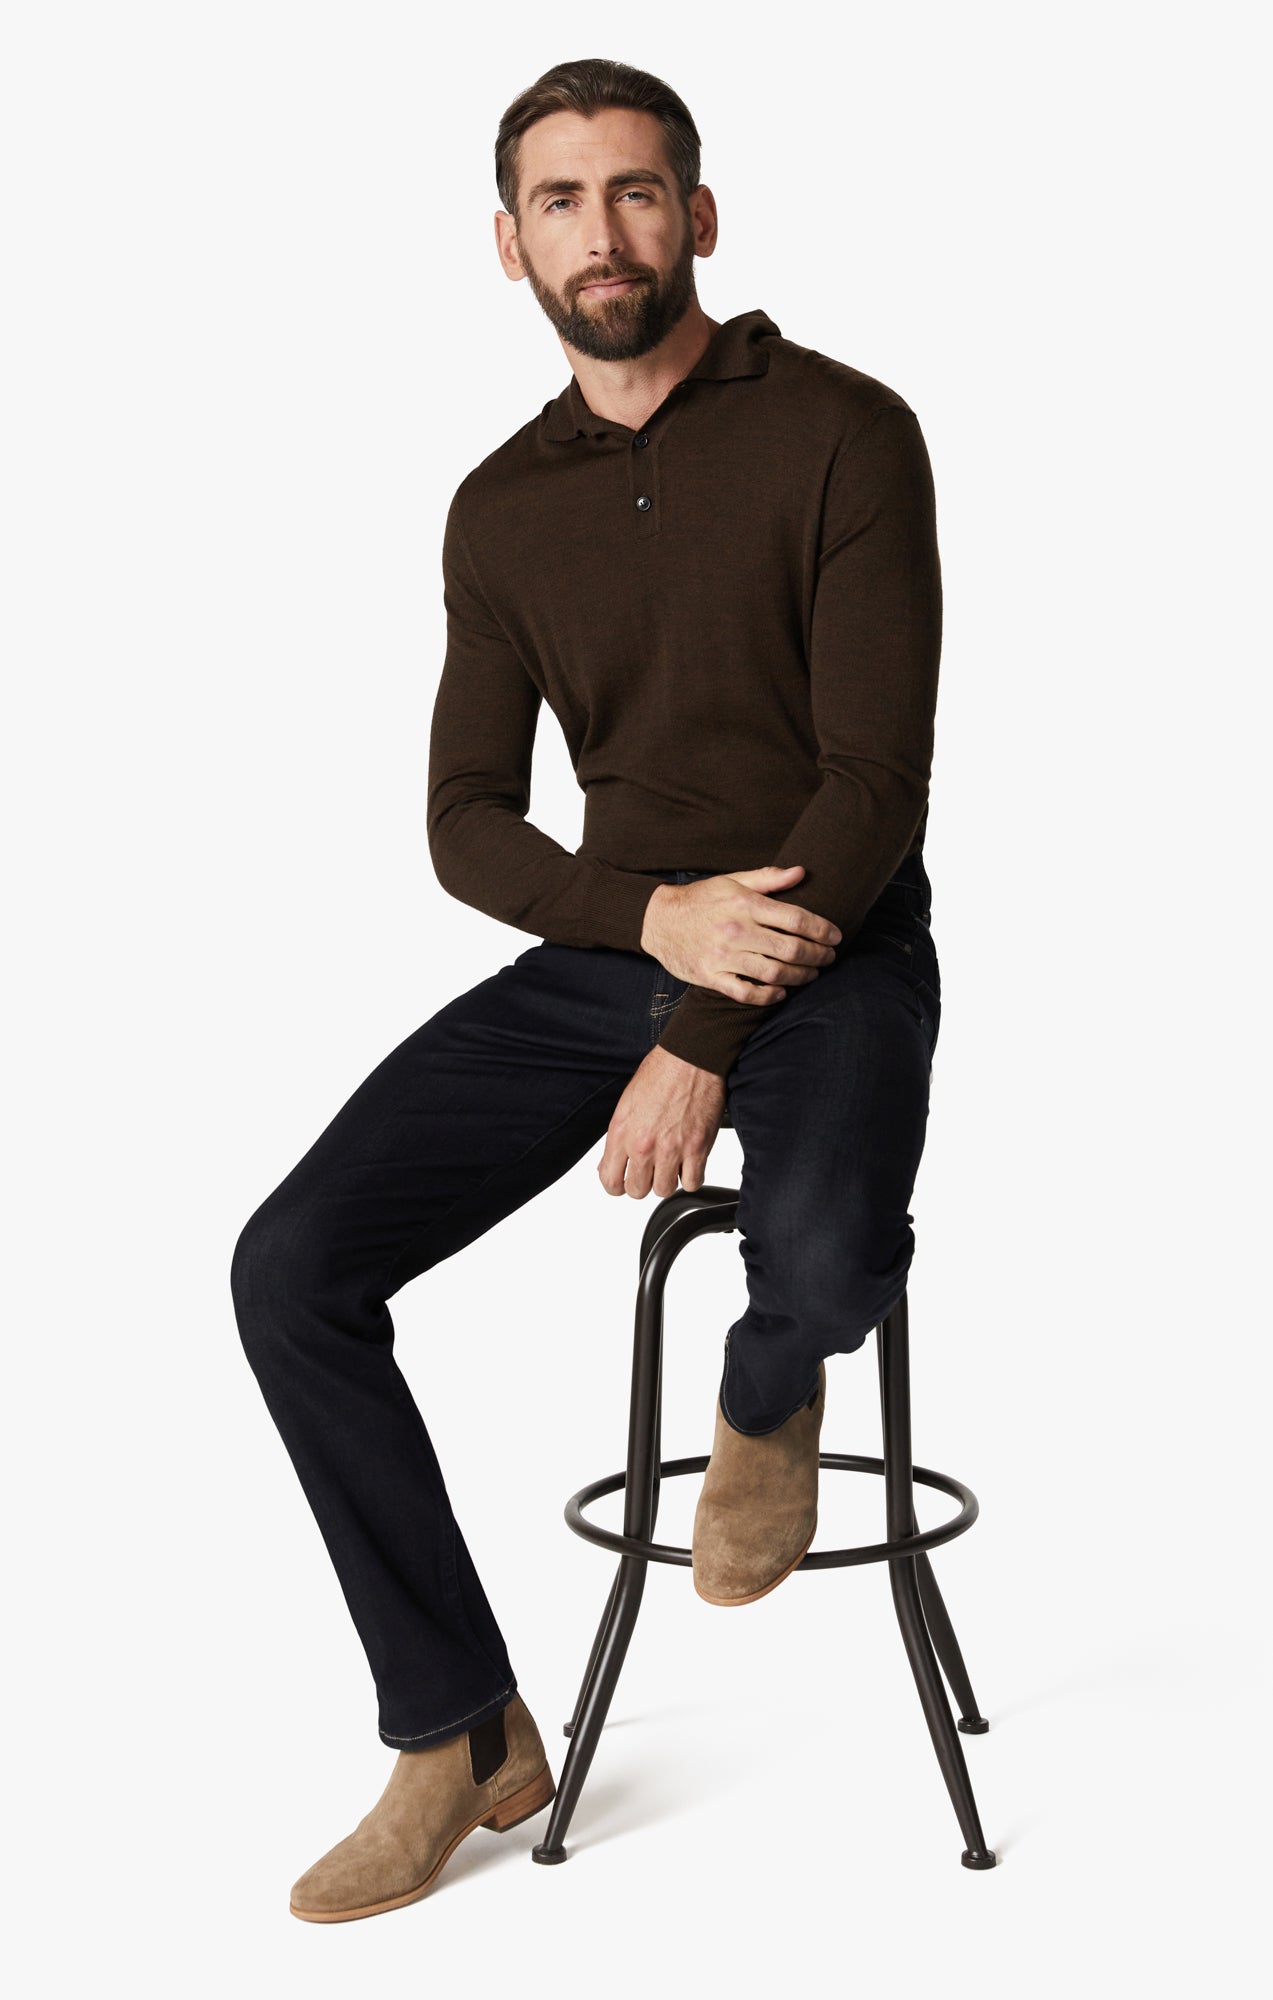 Cool Tapered Leg Jeans In Midnight Refined